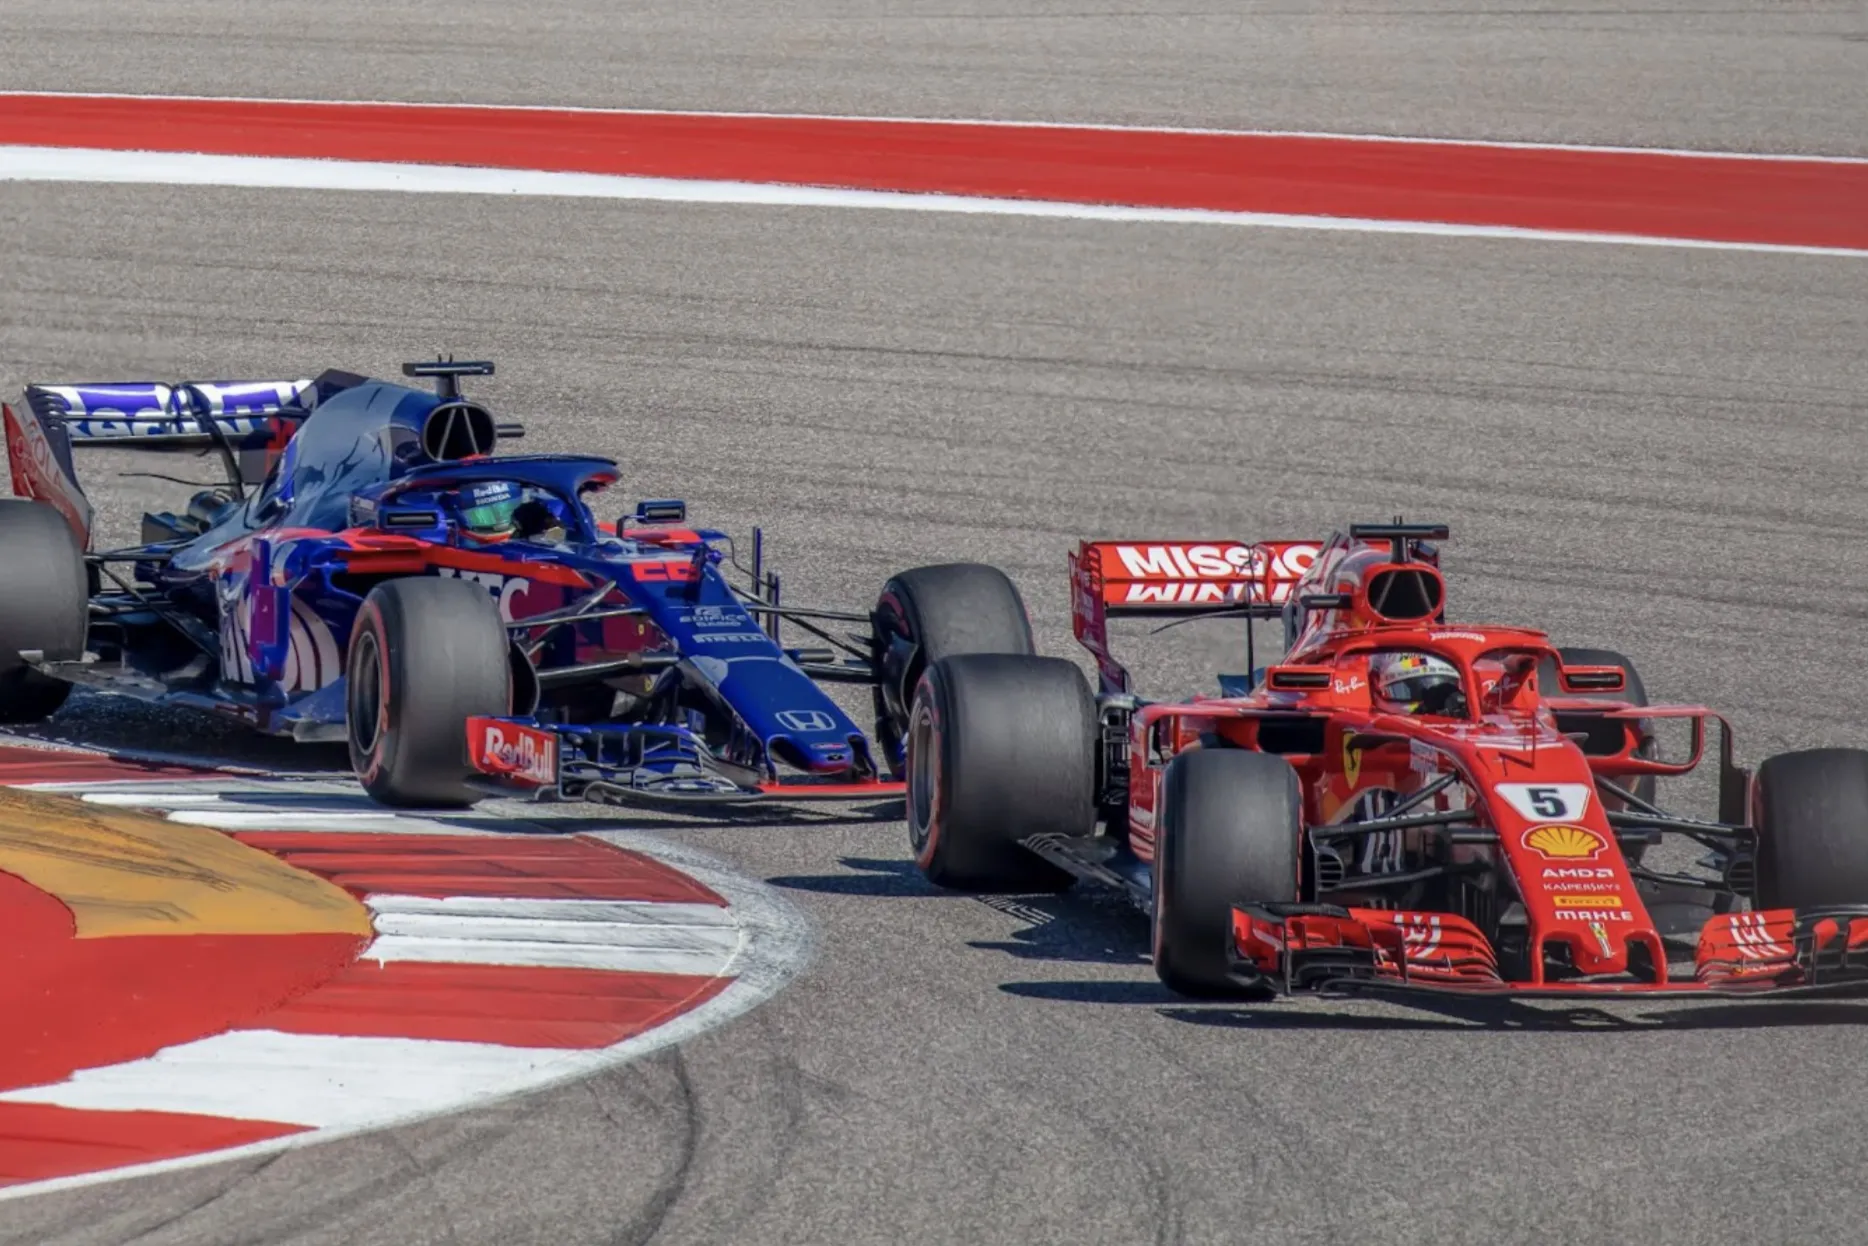 A Red Bull Racing F1 car closely tails a Ferrari F1 car as they round a corner at the Austin Grand Prix